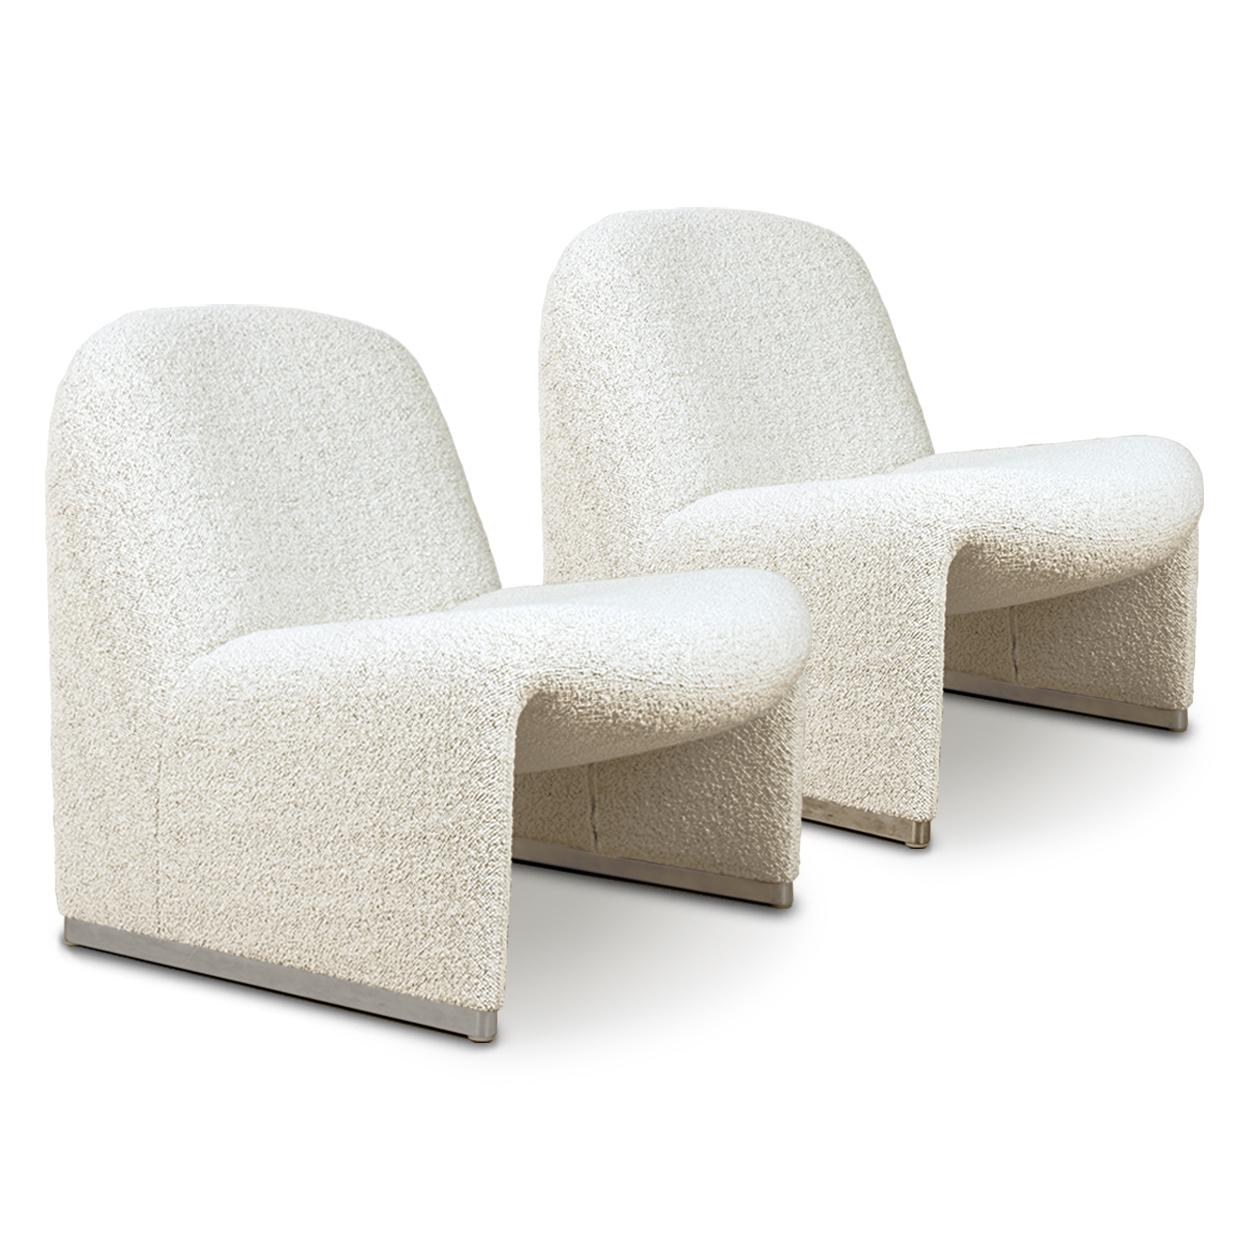 Alky Piretti Chairs, New Upholstered with Fabric Dedar, Italy 2